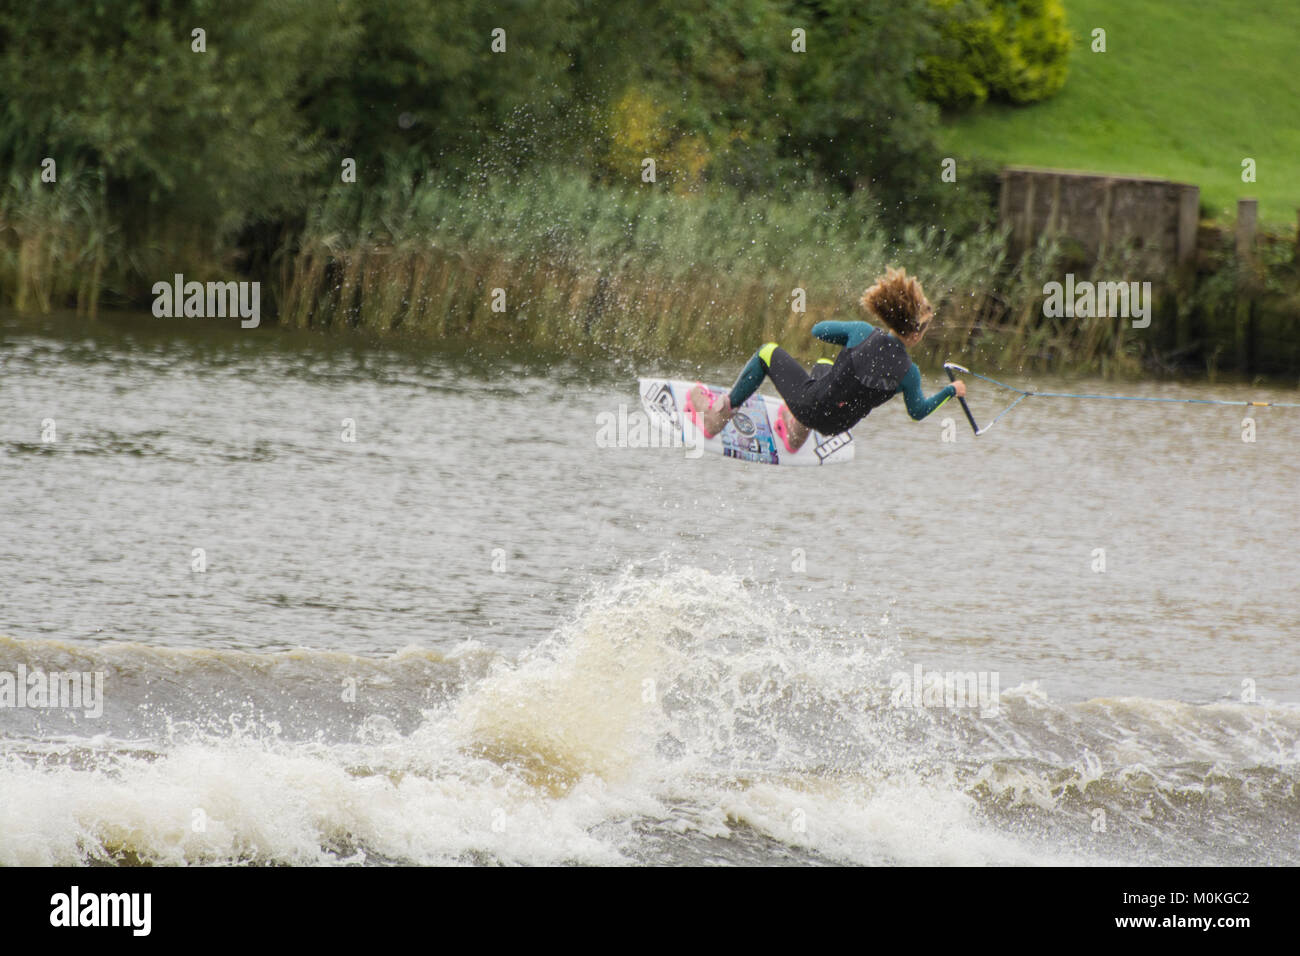 River Bann, Coleraine, Northern Ireland. - August 13th, 2016 :- A competitor in the European & African Wakeboard Championships on the River Bann Coler Stock Photo